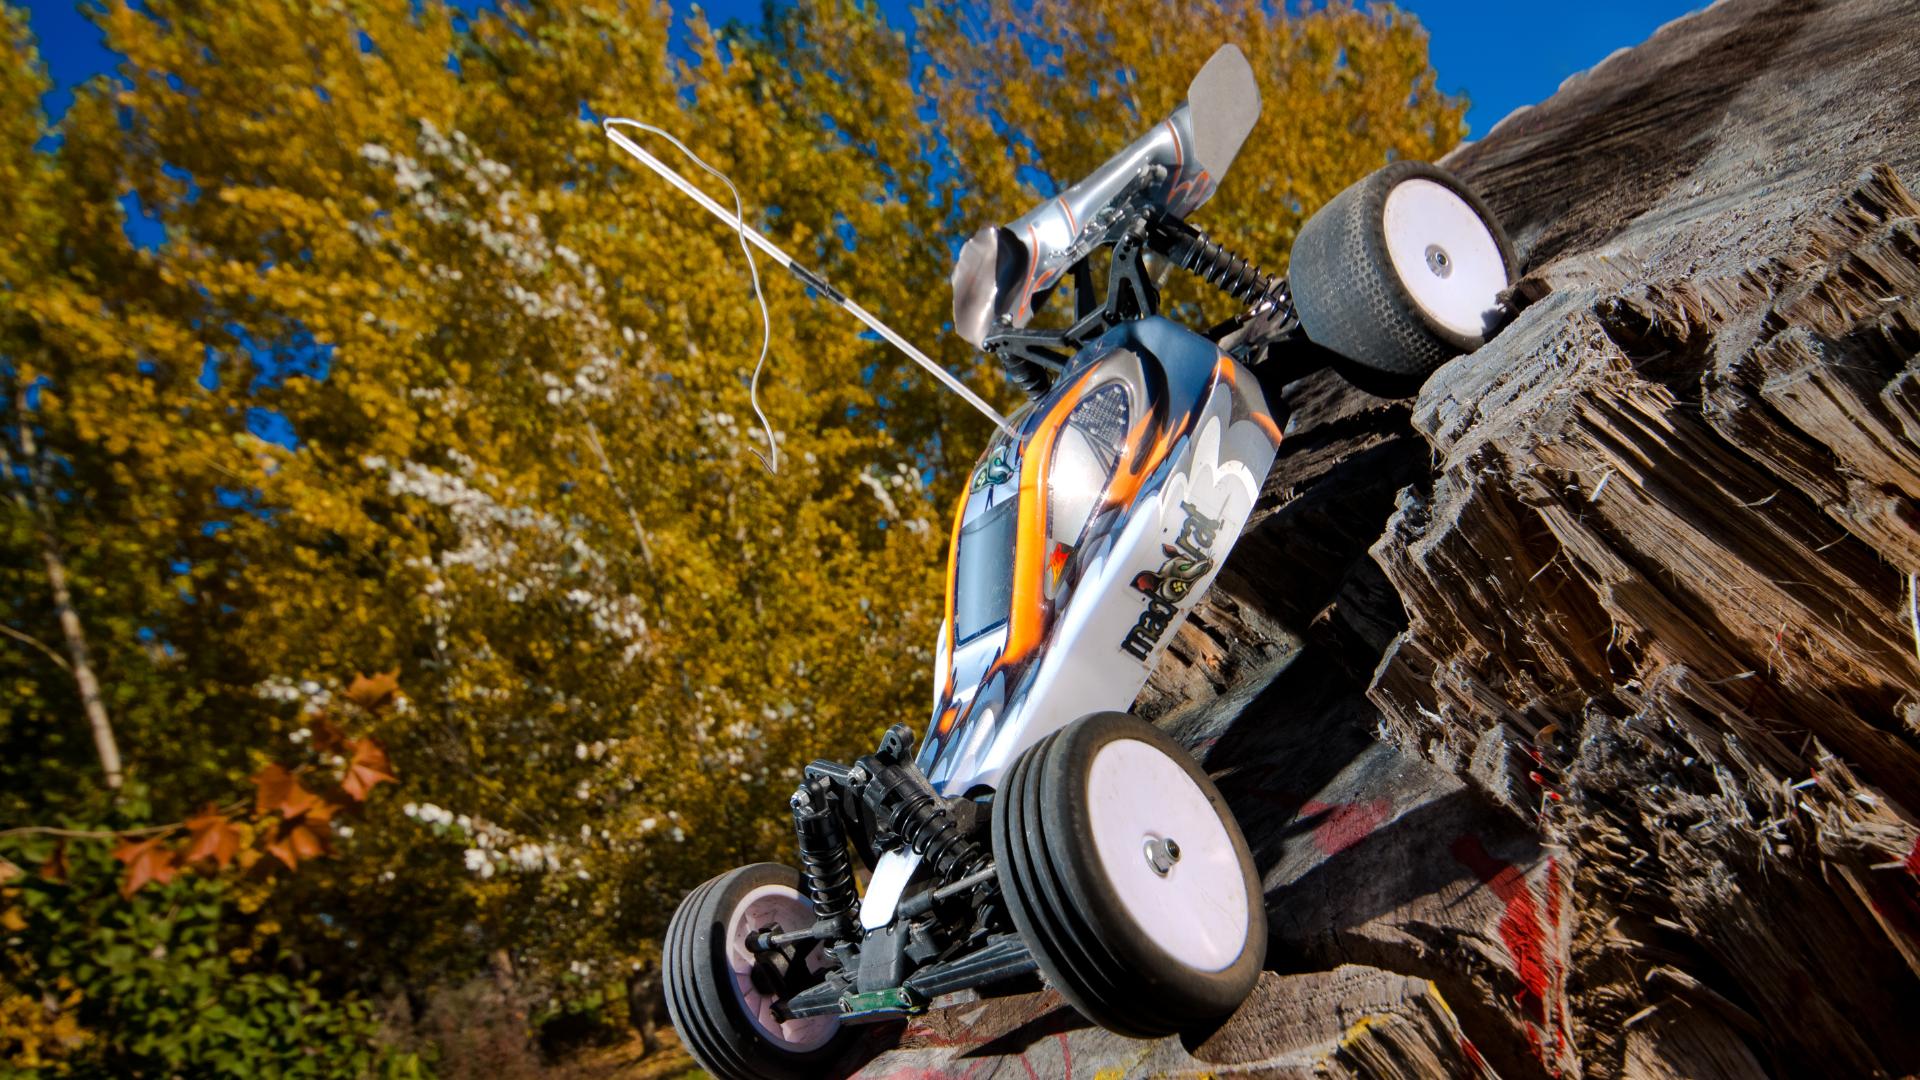 Biggest Remote Control Car: Breaking Barriers: The Incredible Technology of the Biggest RC Car